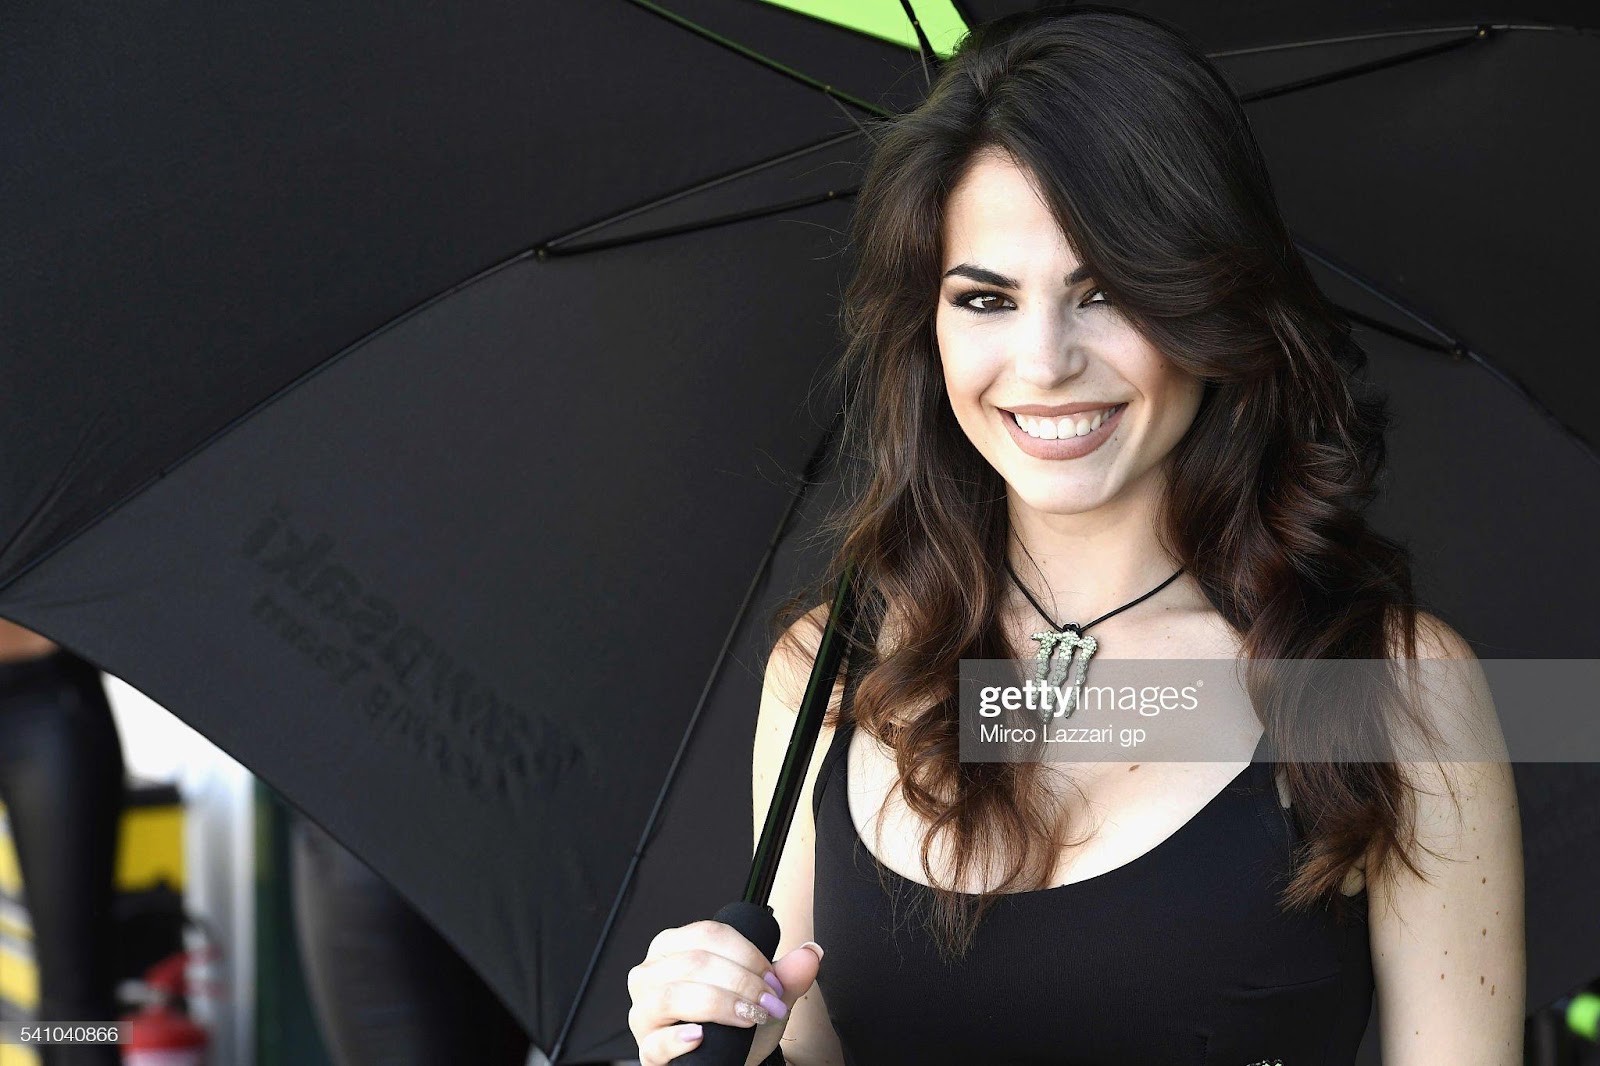 D:\Documenti\posts\posts\Women and motorsport\foto\Getty e altre\grid-girl-smiles-in-pit-before-the-race-1-during-the-fim-superbike-picture-id541040866.jpg